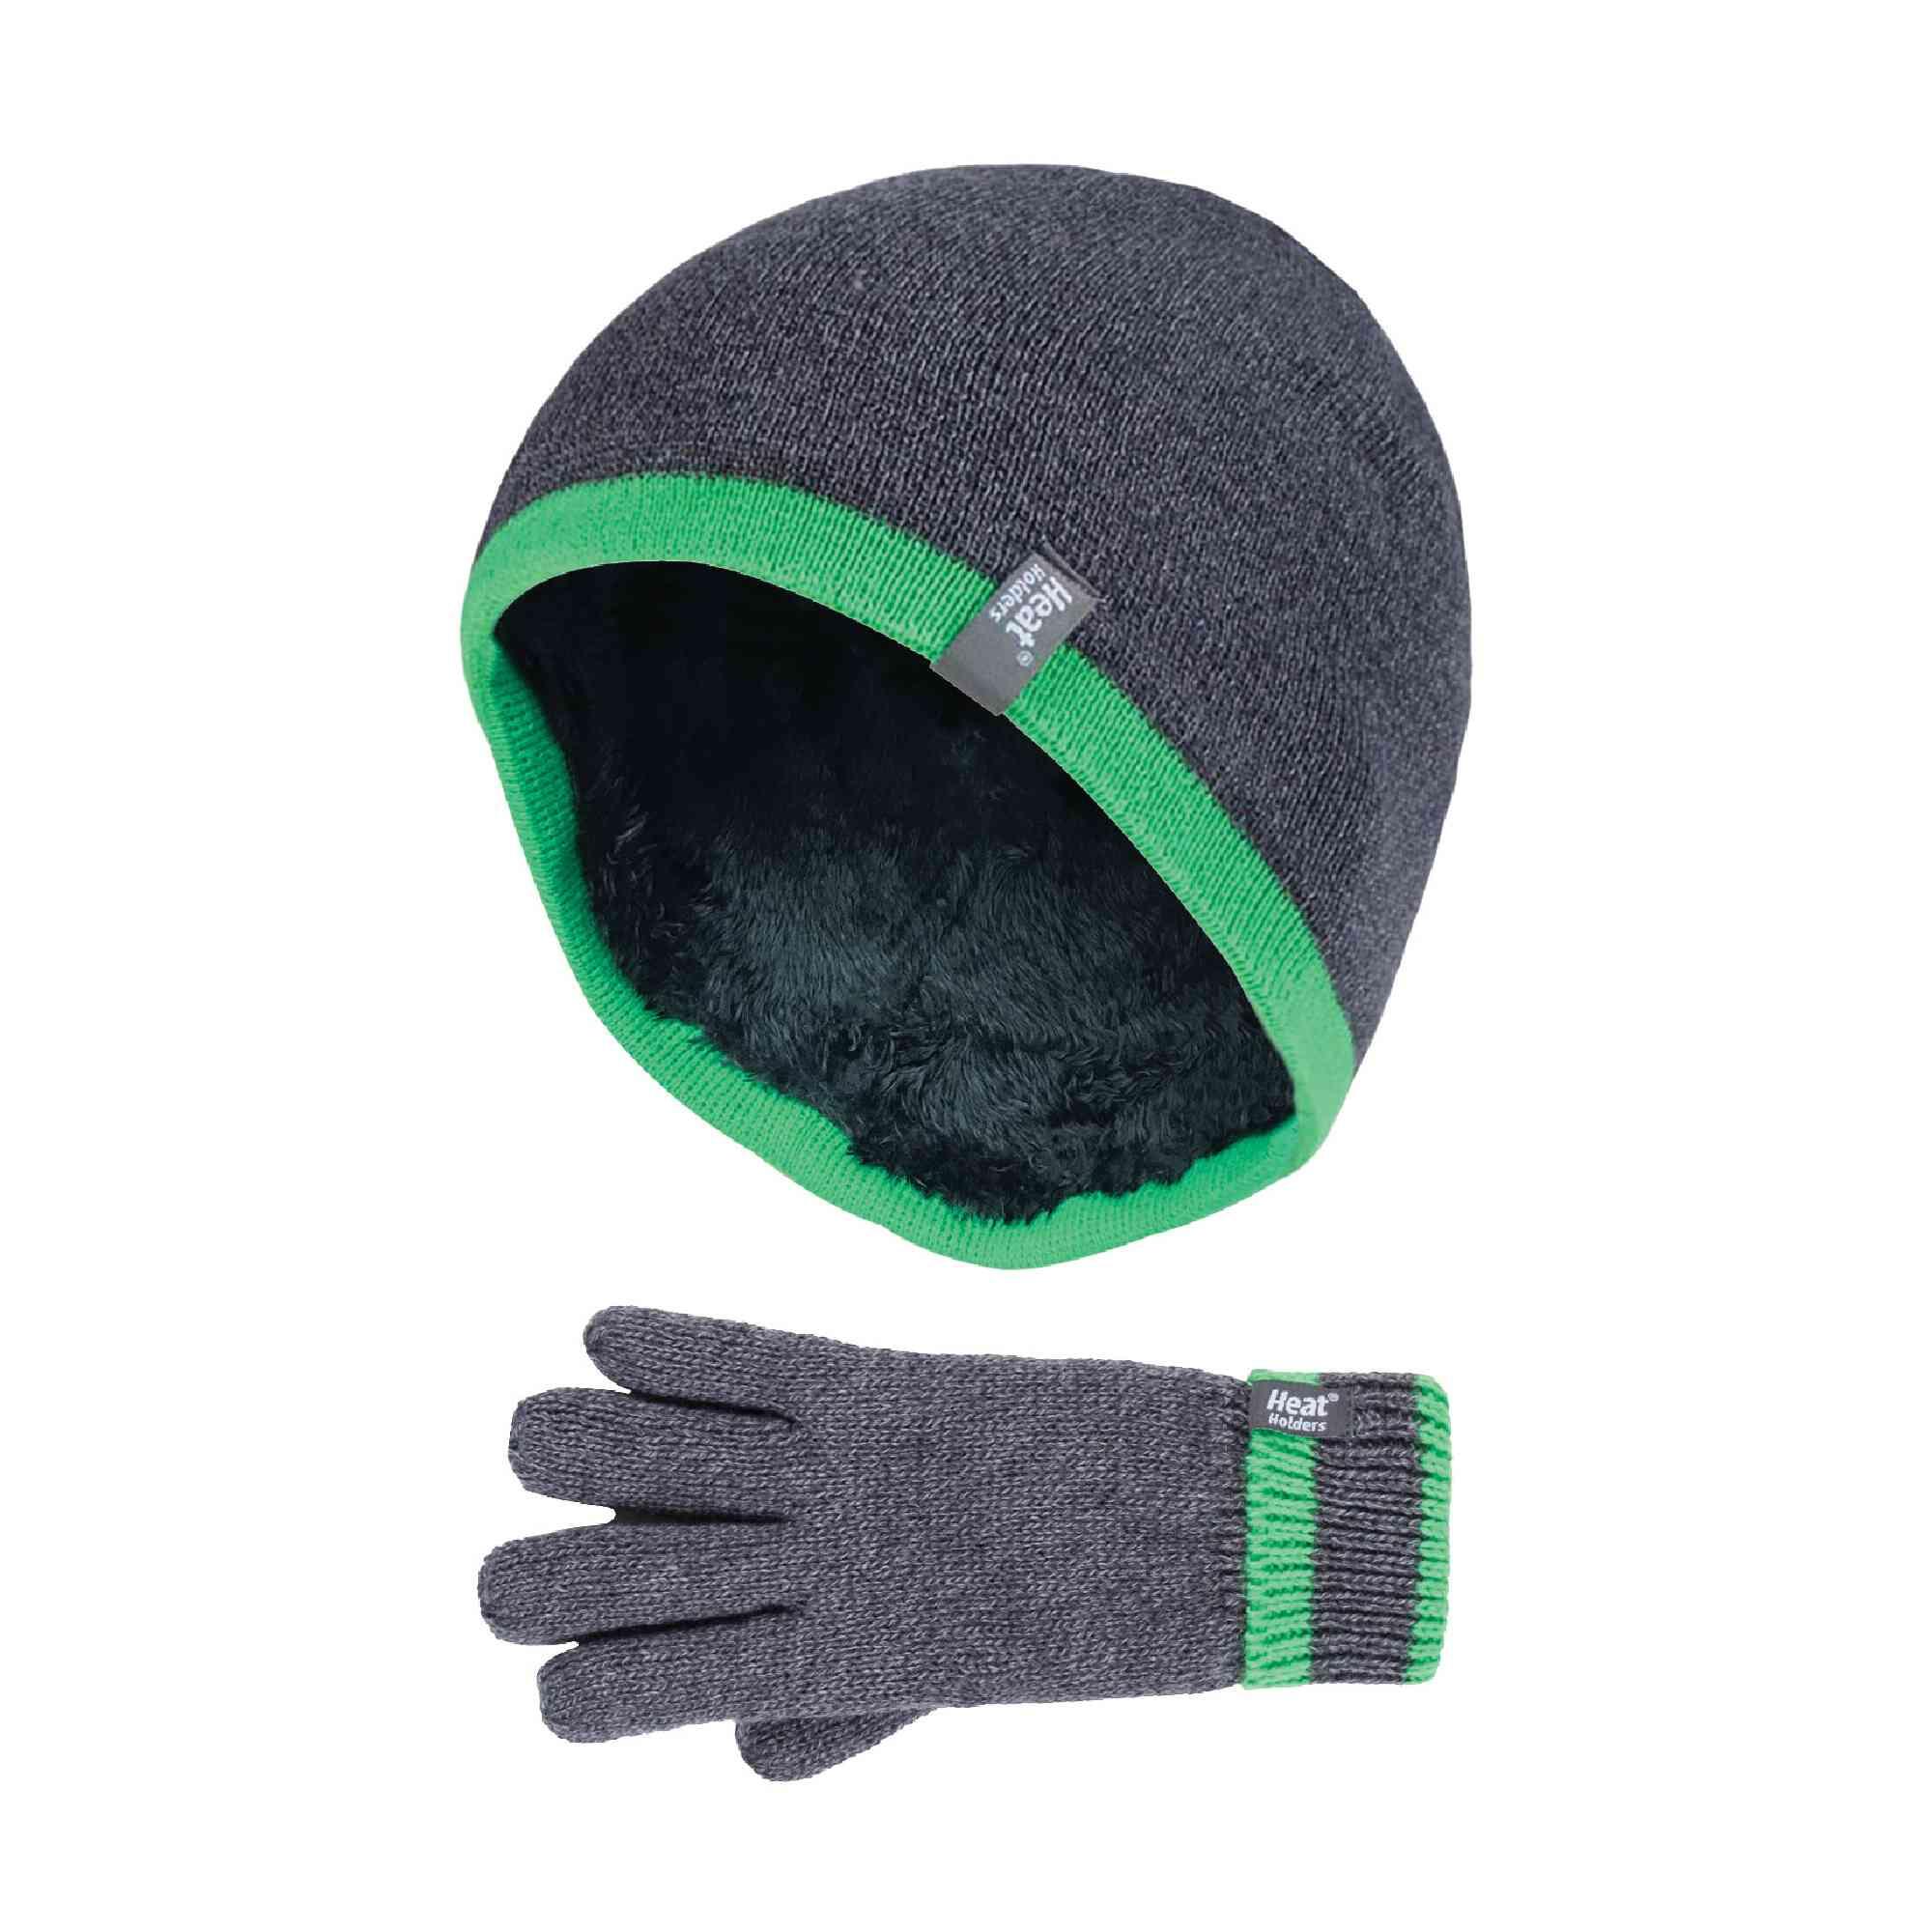 HEAT HOLDERS Children Winter Warm Fleece Lined Knit Turn Over Cuff Ribbed Hat and Gloves Set